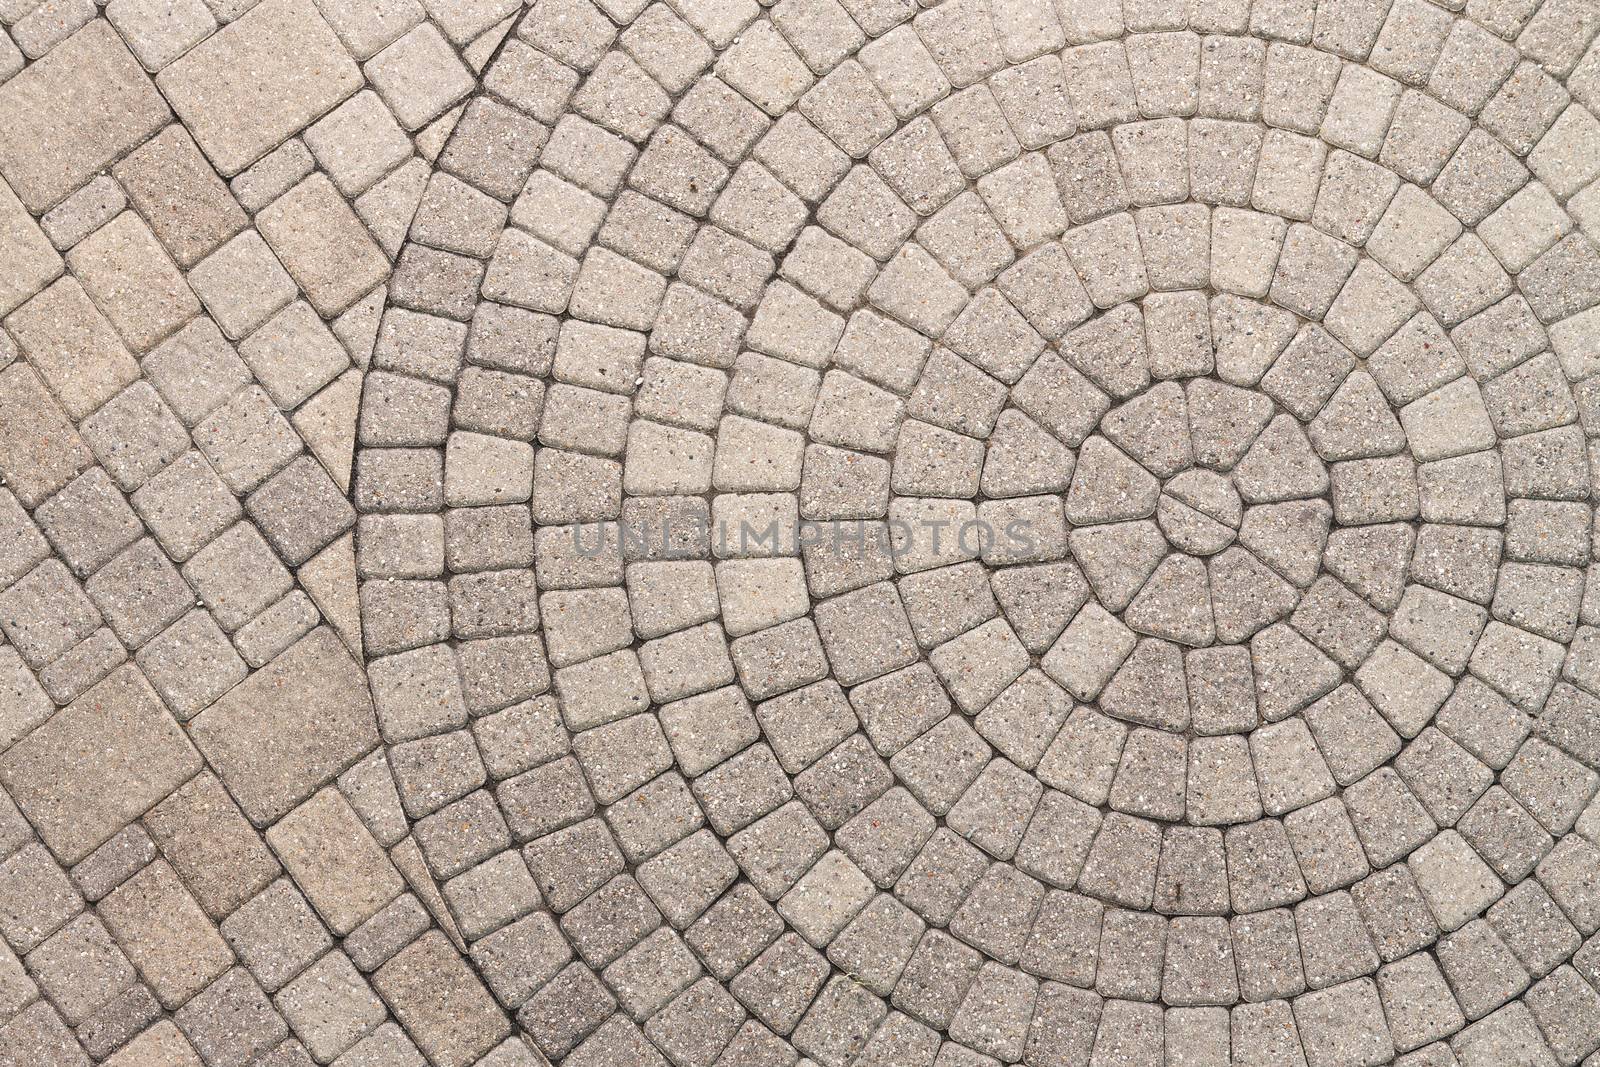 Circle Design pattern in patio paving by coskun